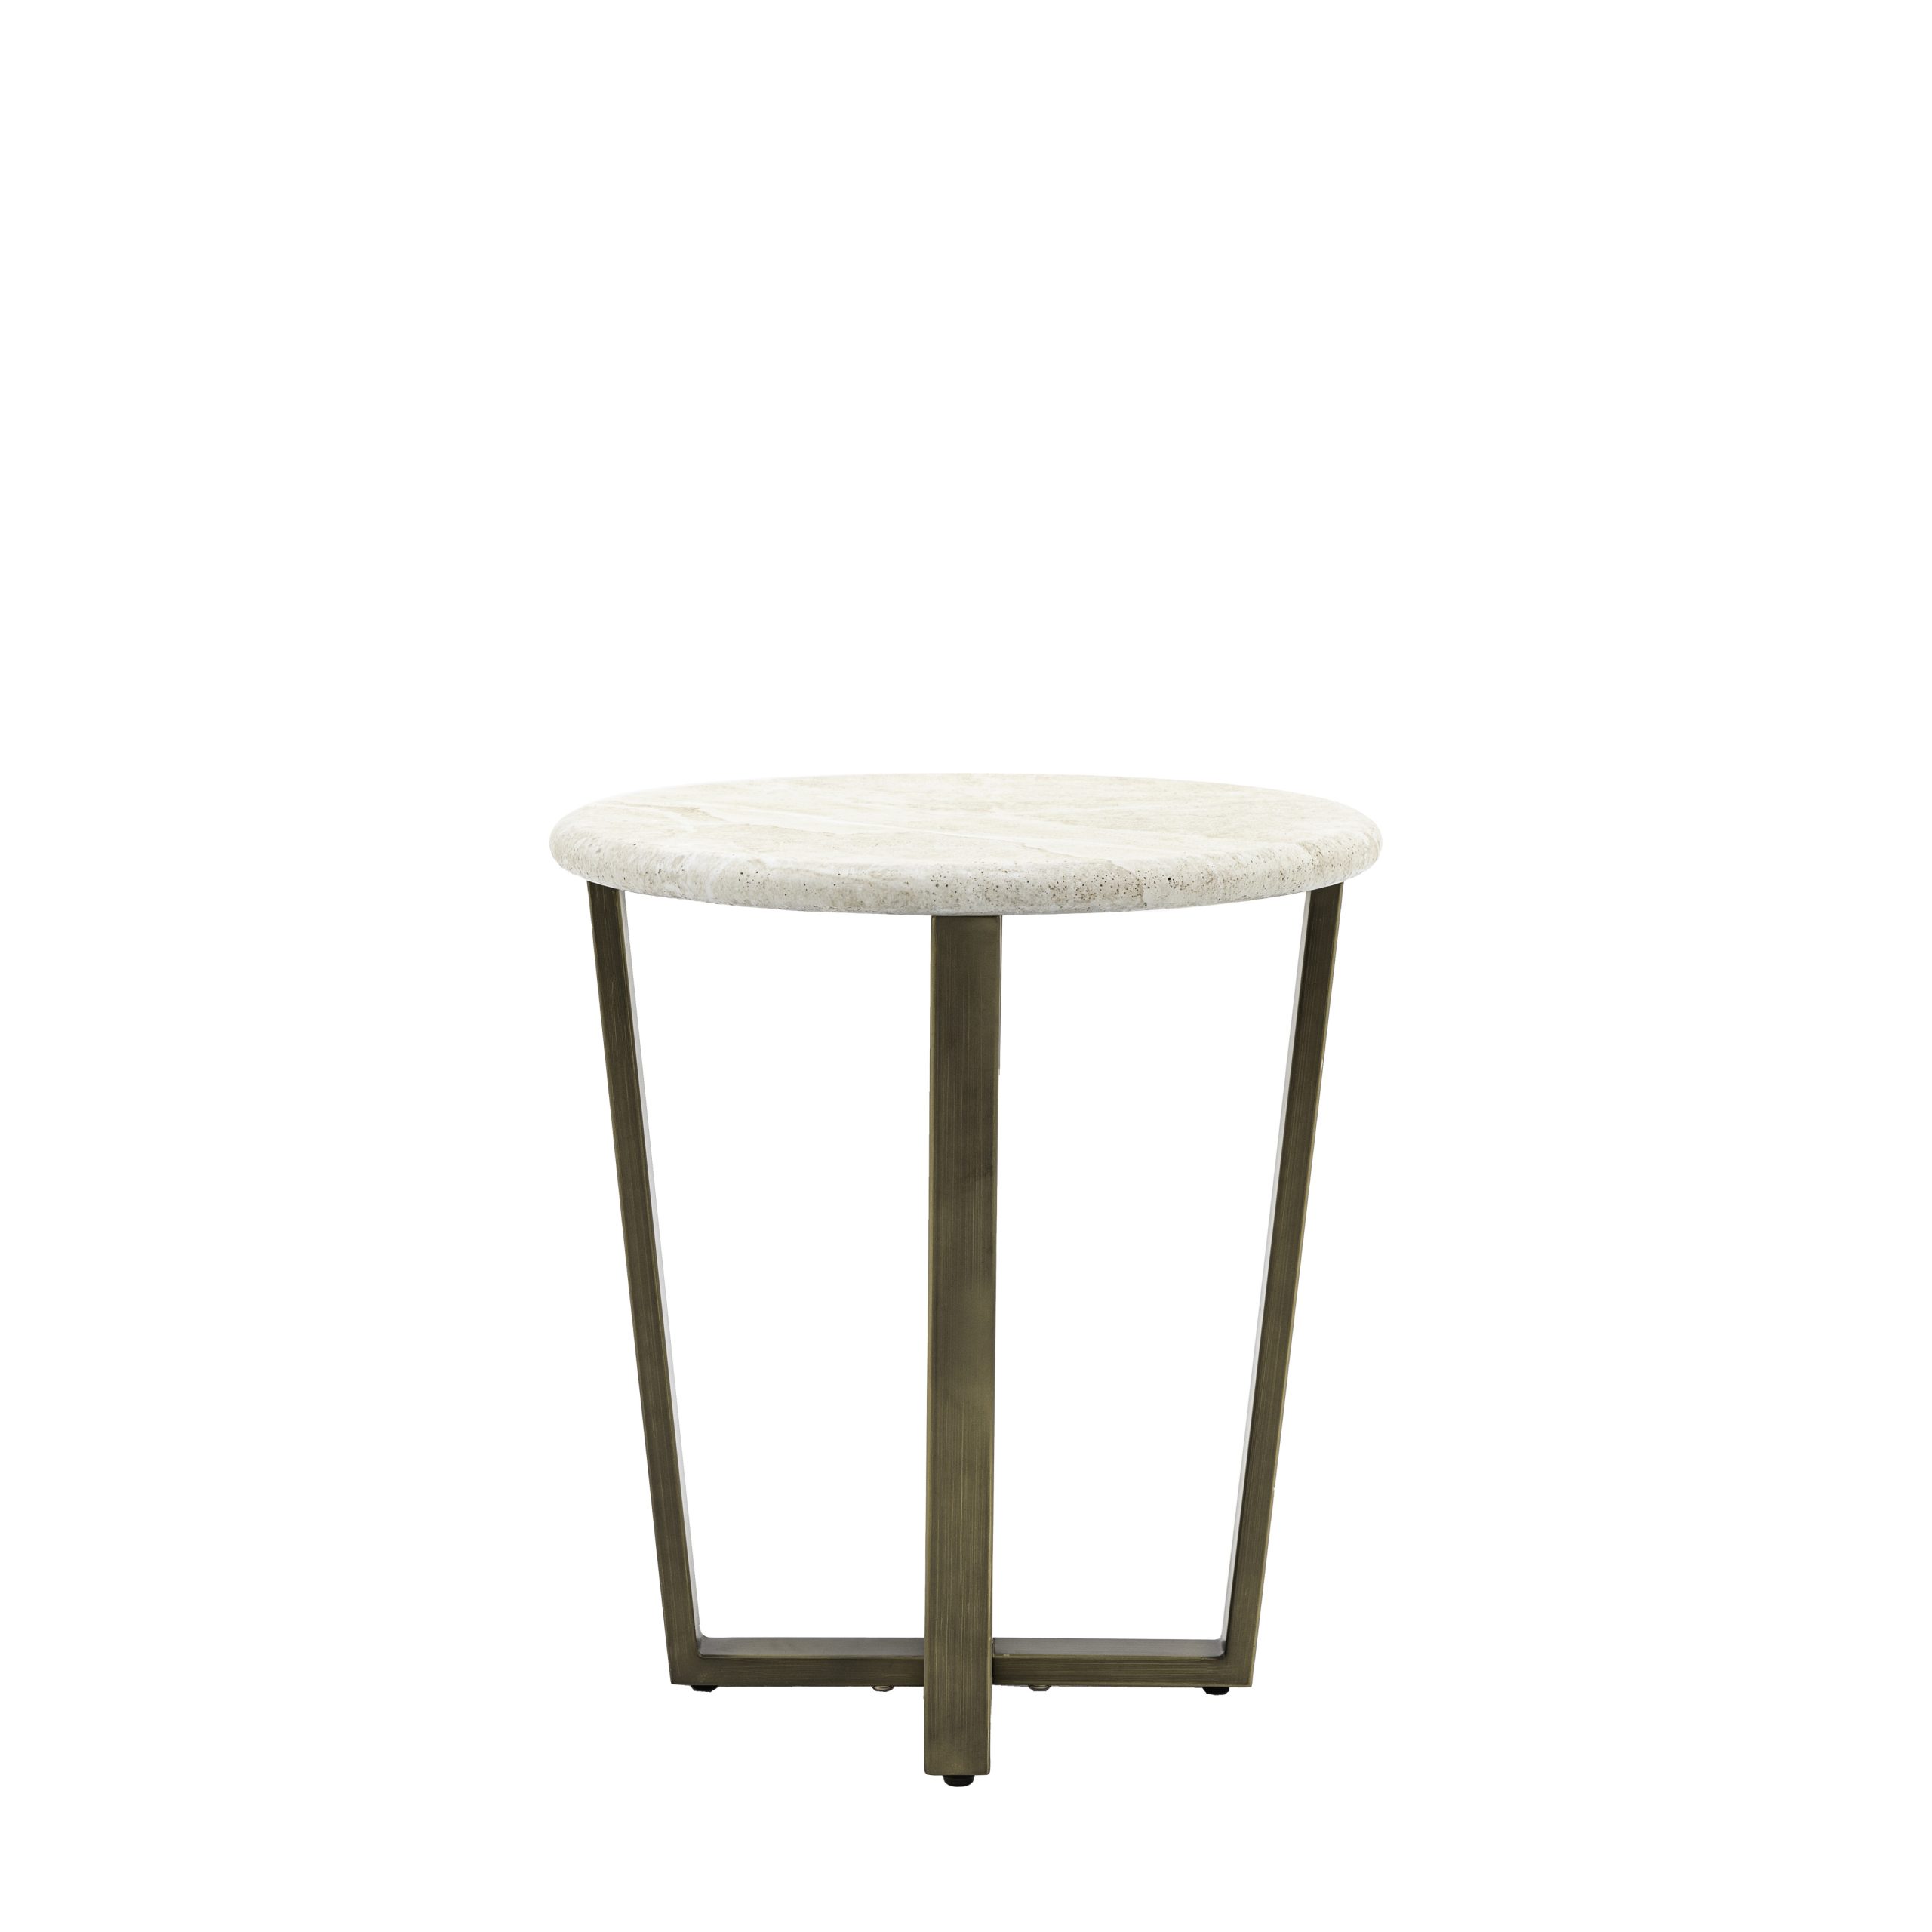 Gallery Direct Moderna Side Table